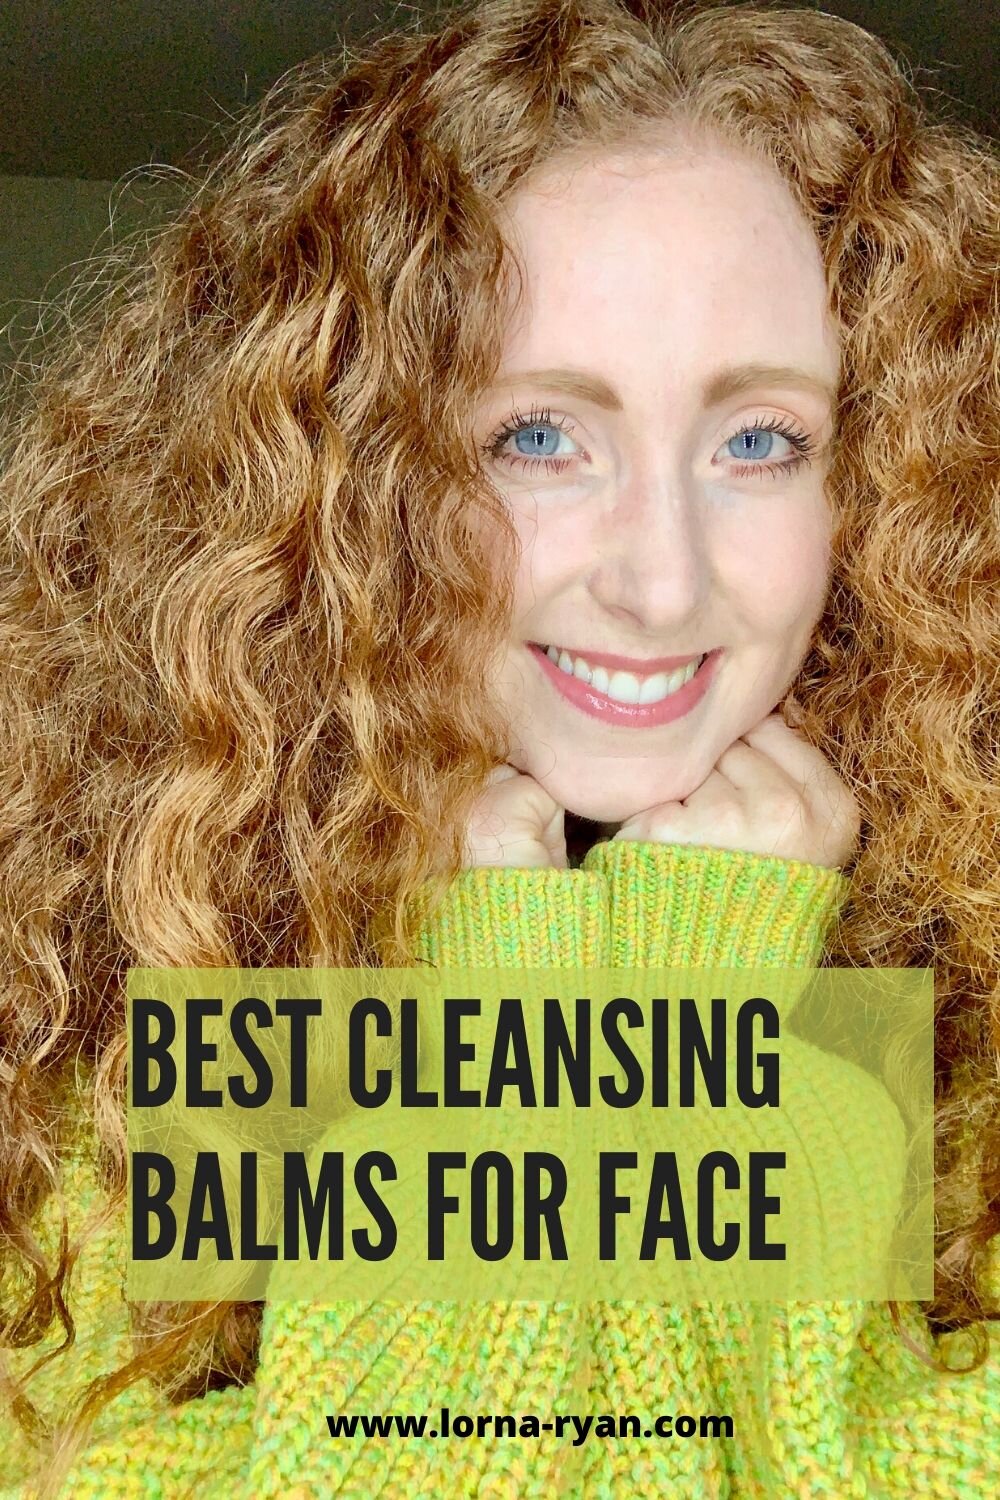 the best 5 cleansing balms to melt away make up. gentle cleansing balms for oily skin, dry skin and all skin types